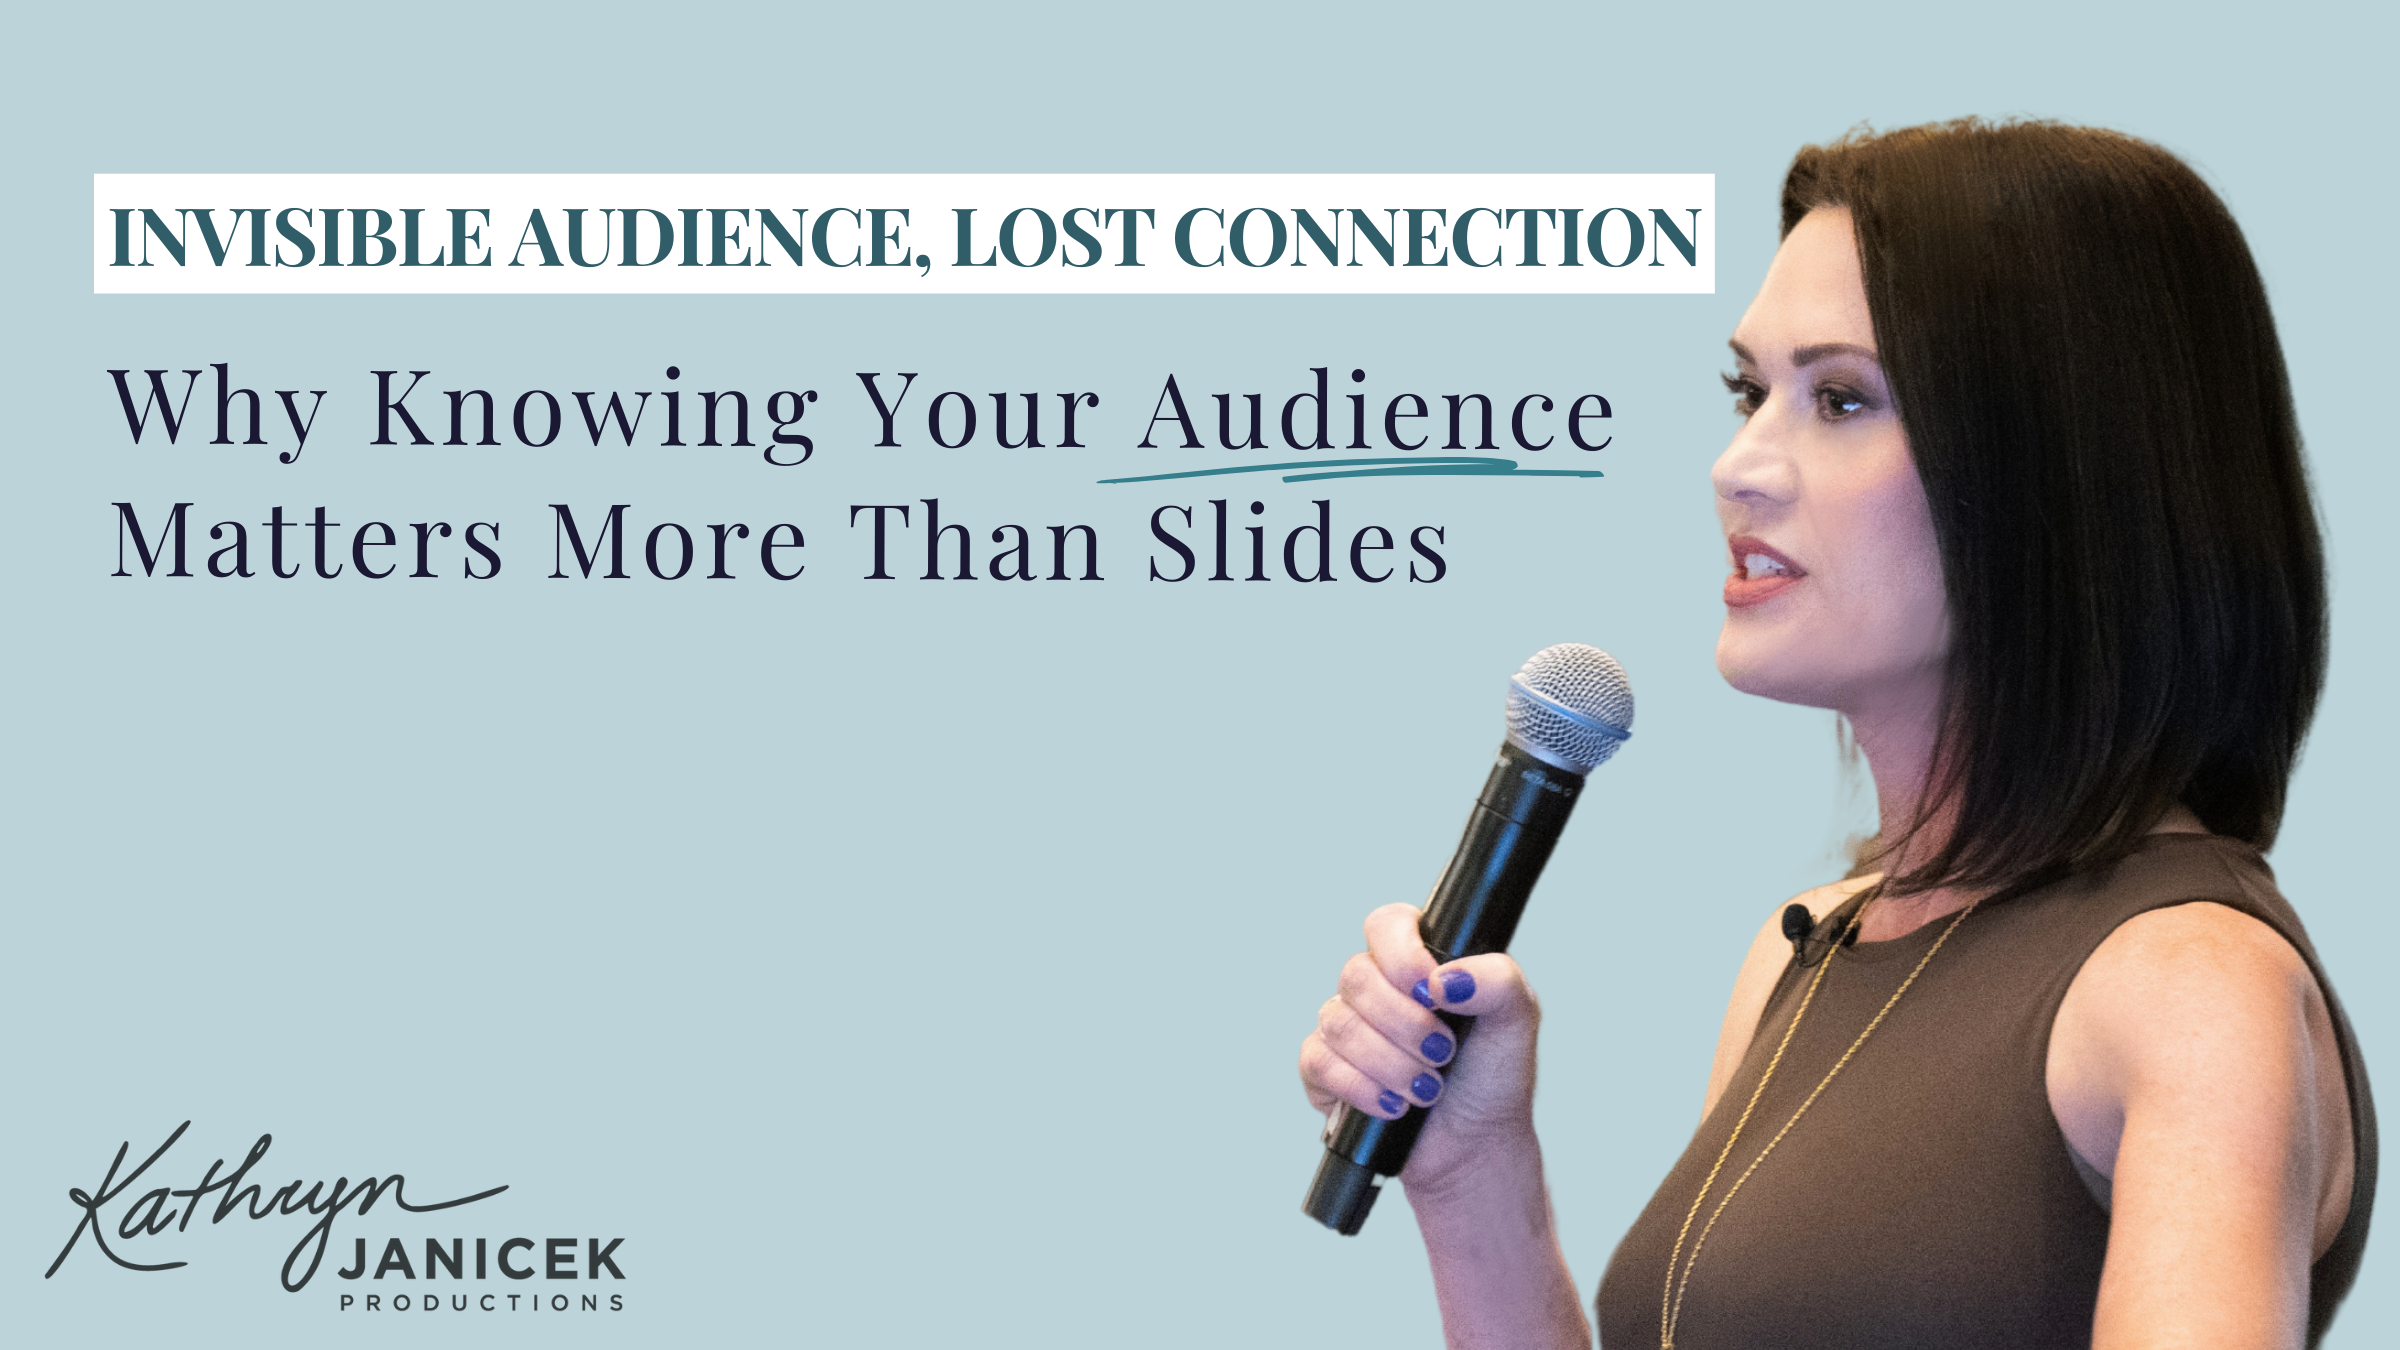 Invisible Audience, Lost Connection: Why Knowing Your Audience Matters More Than Slides